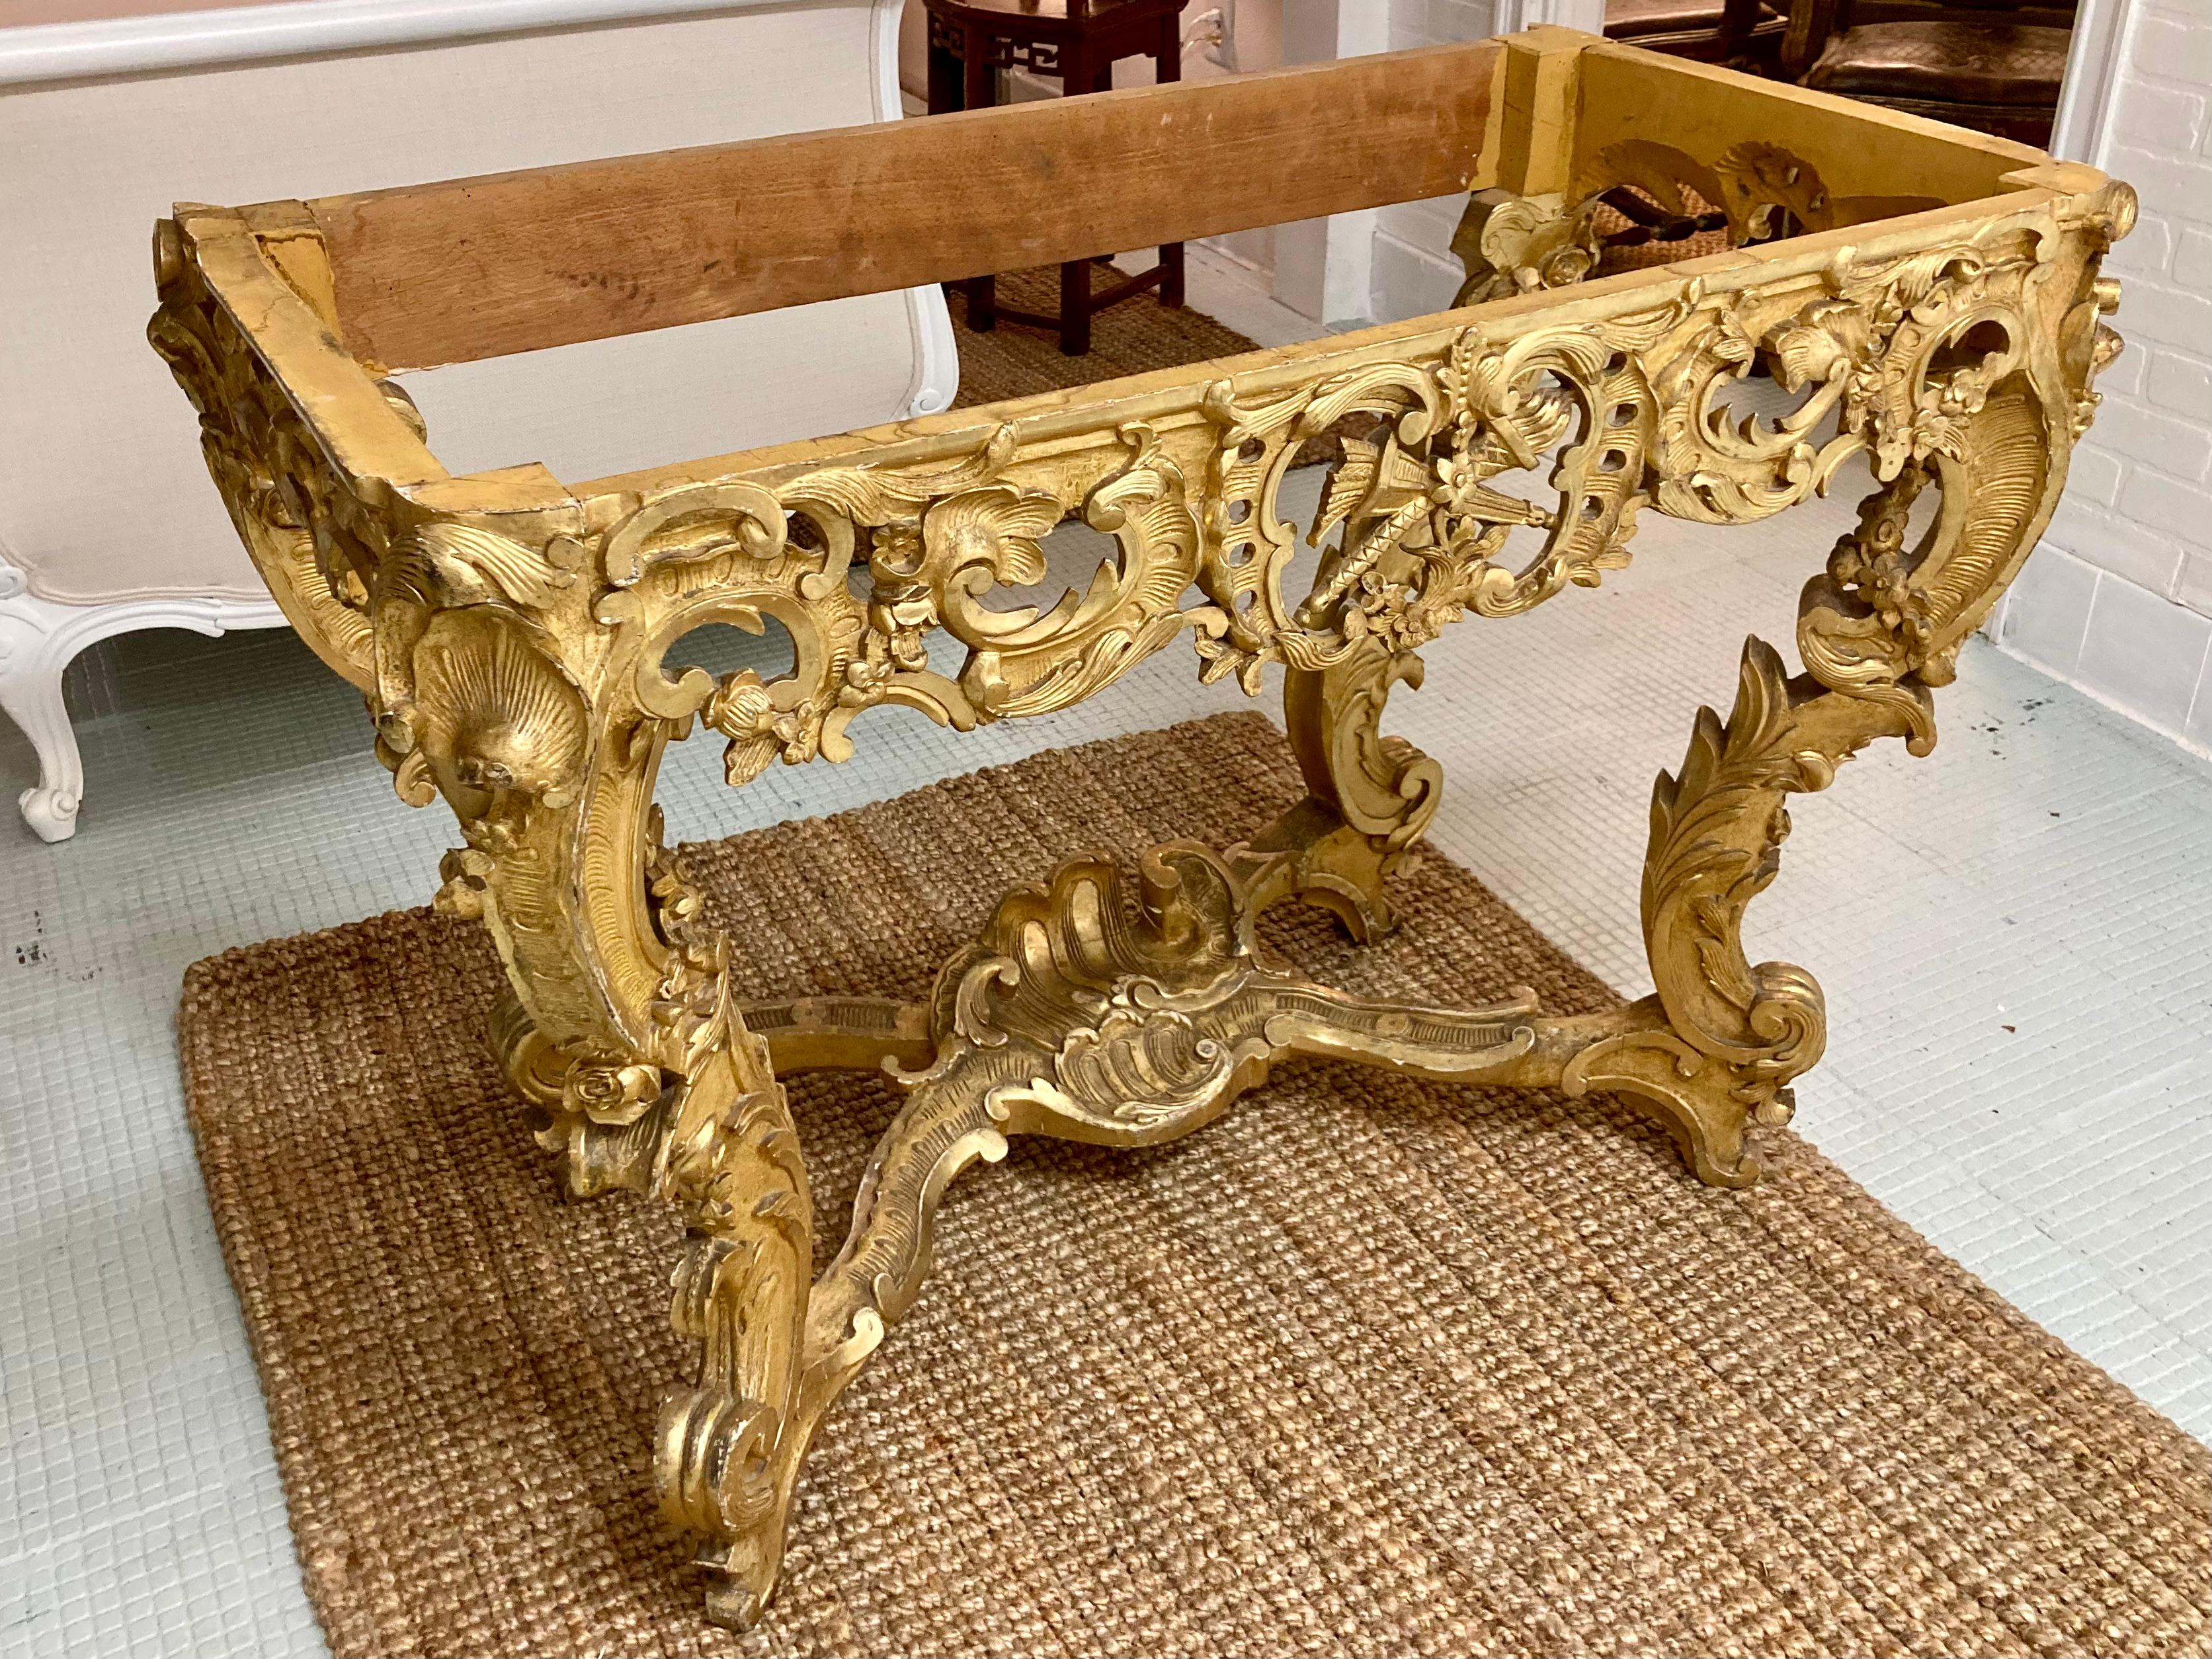 Beautiful French 18th Century Regency gilt carved console with no top, base only. Very important Regency console from a Michael Taylor designed interior project of a San Francisco estate that was decorated in the 1970s.